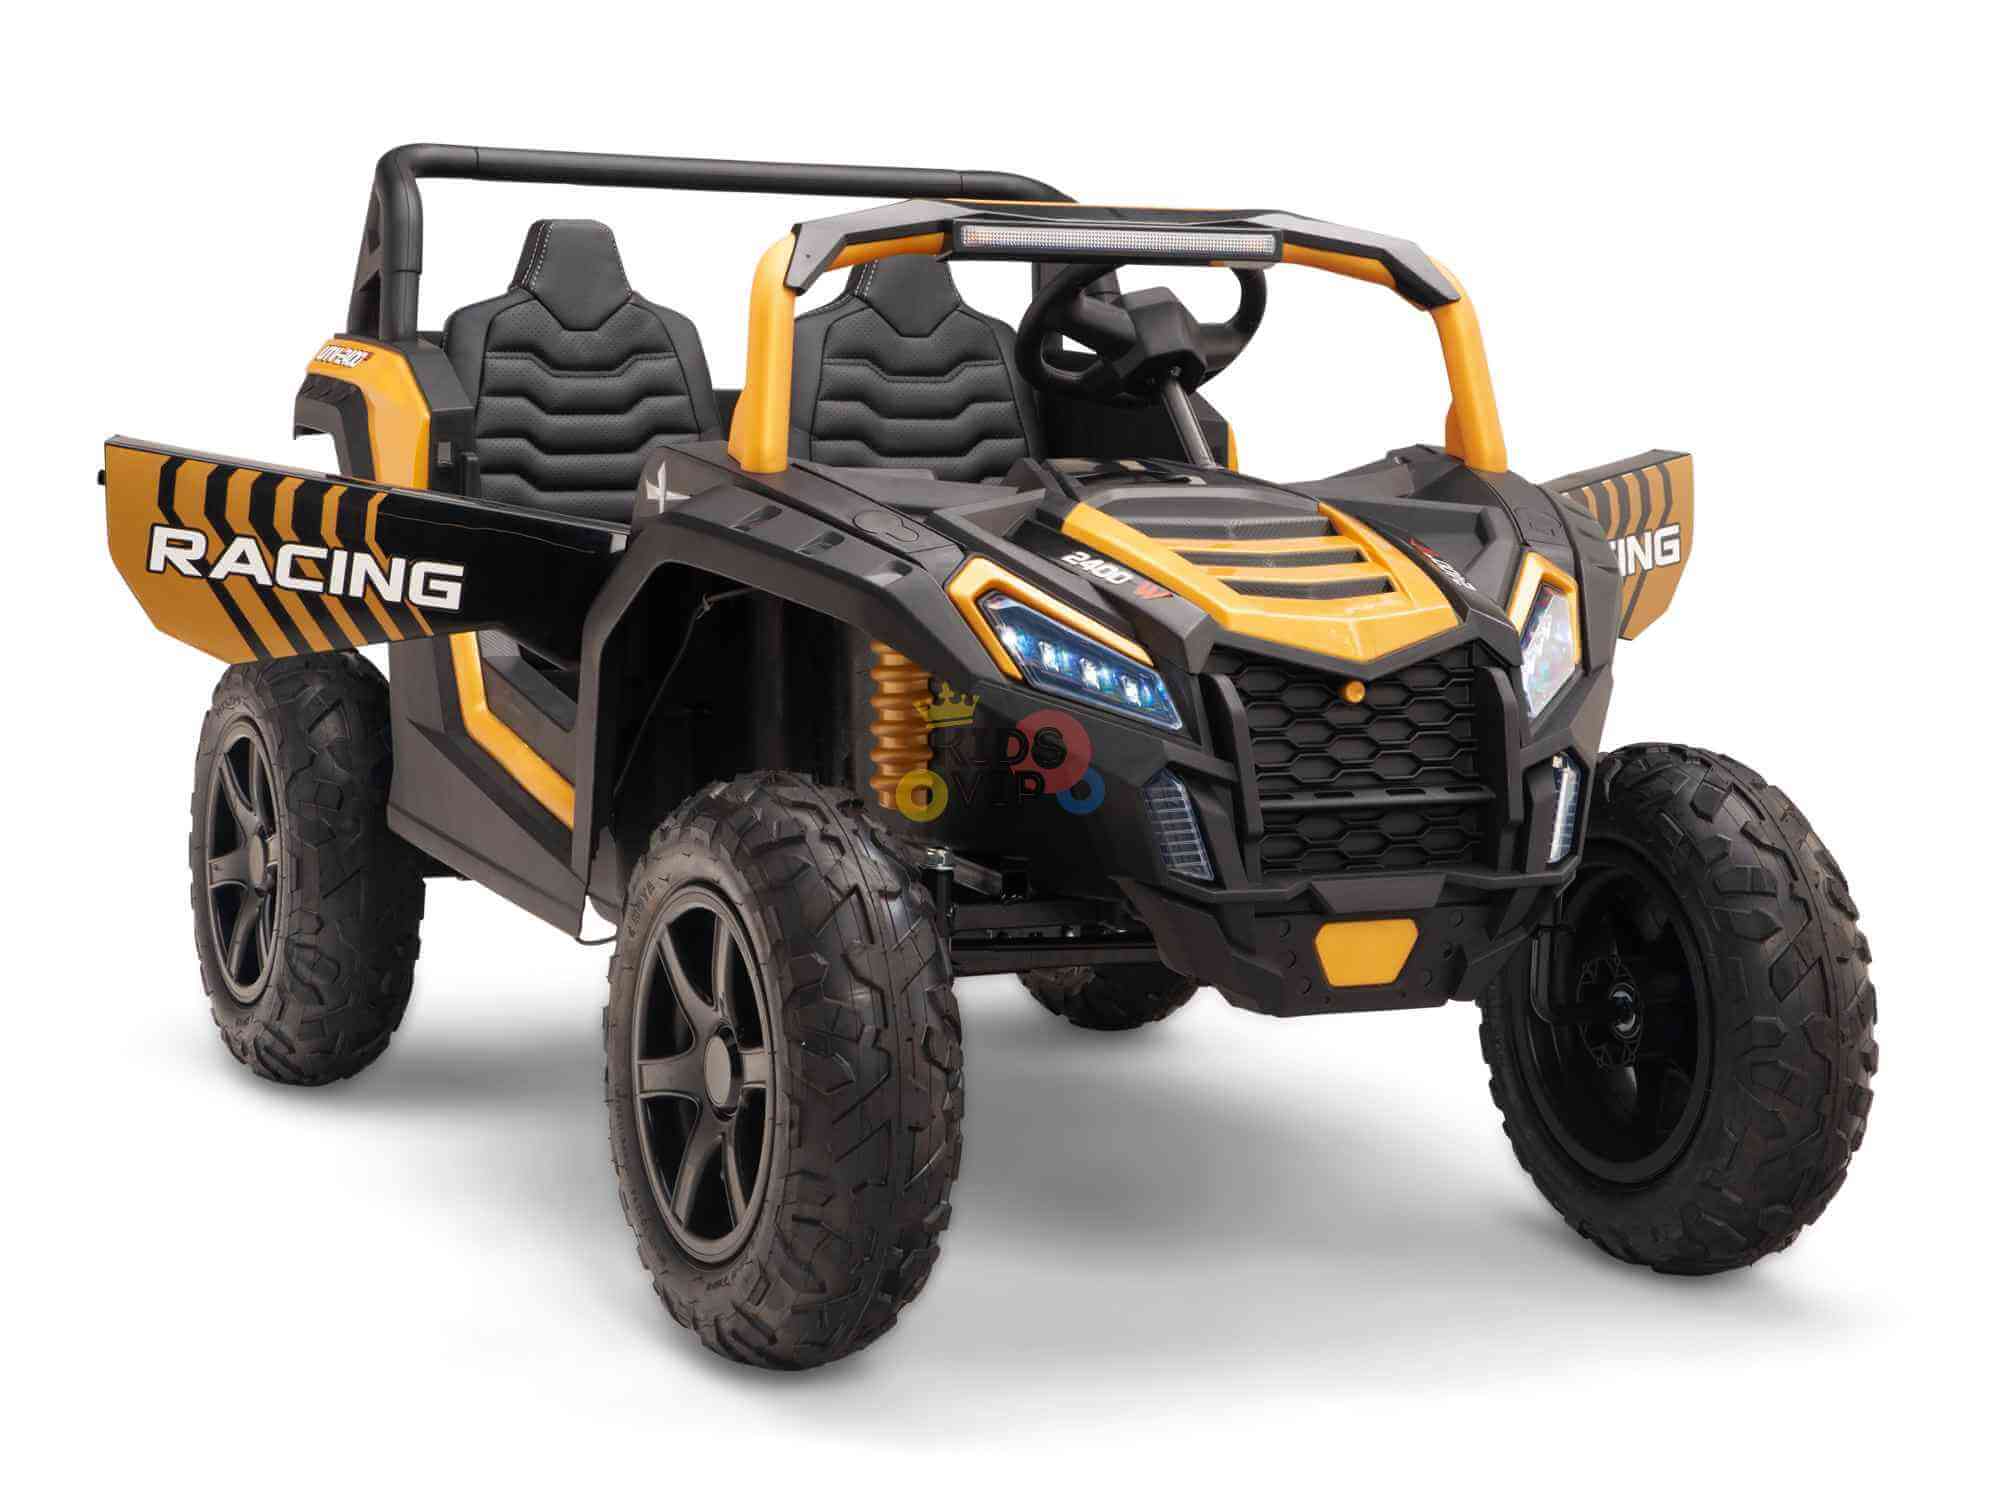 Blade Xr 24V 180W Fast Kids Buggy 2 Seater Gold 2 4 Are Ride-On Cars Worth It? Let’s Find Out